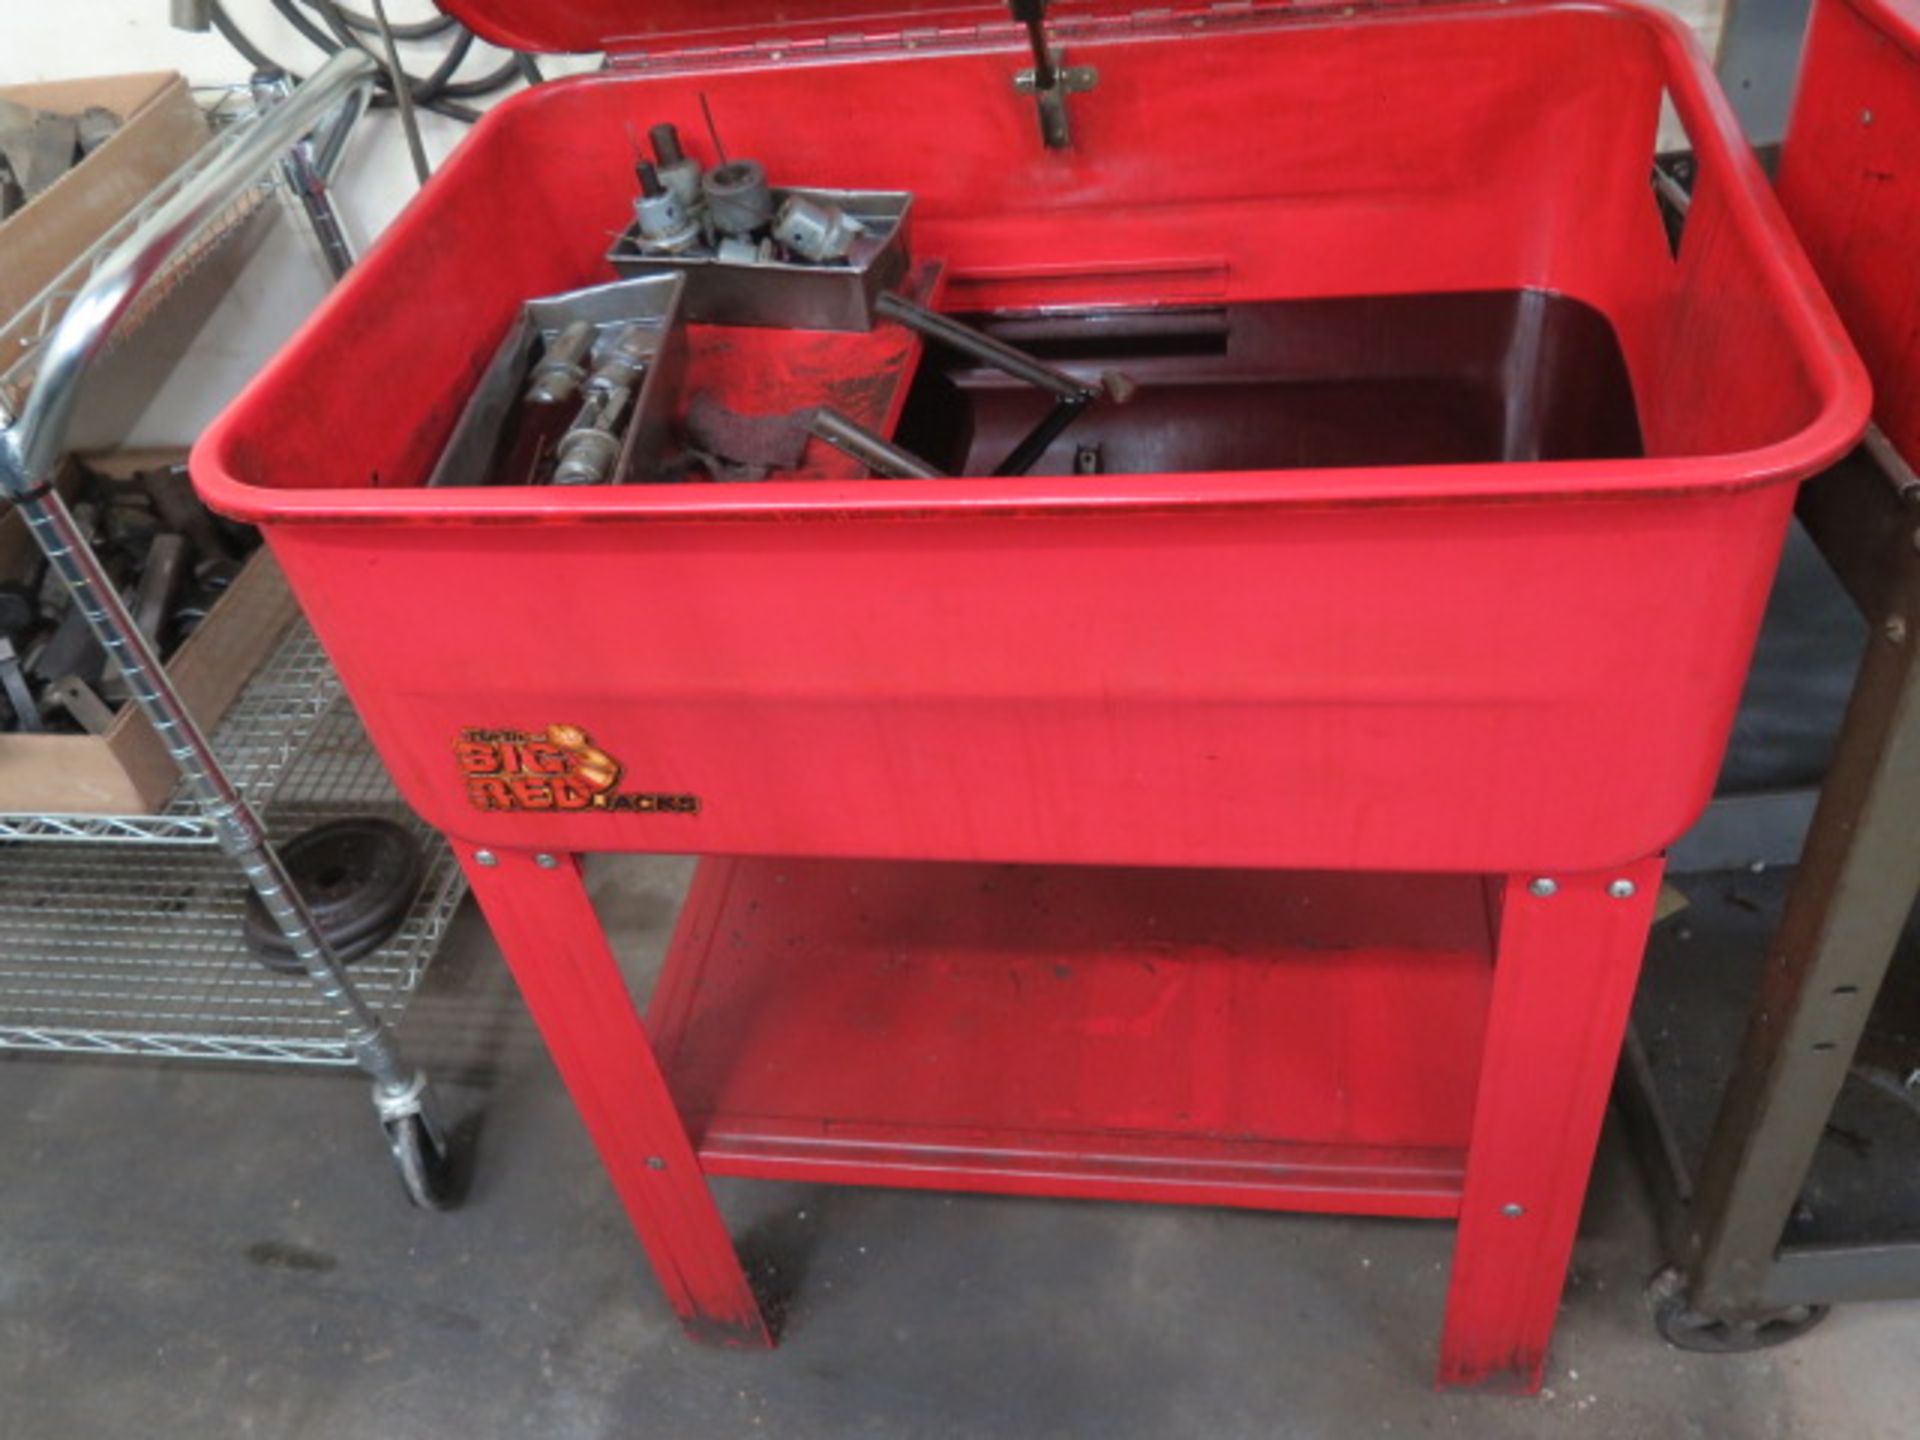 Big Red Parts Washer - Image 2 of 2